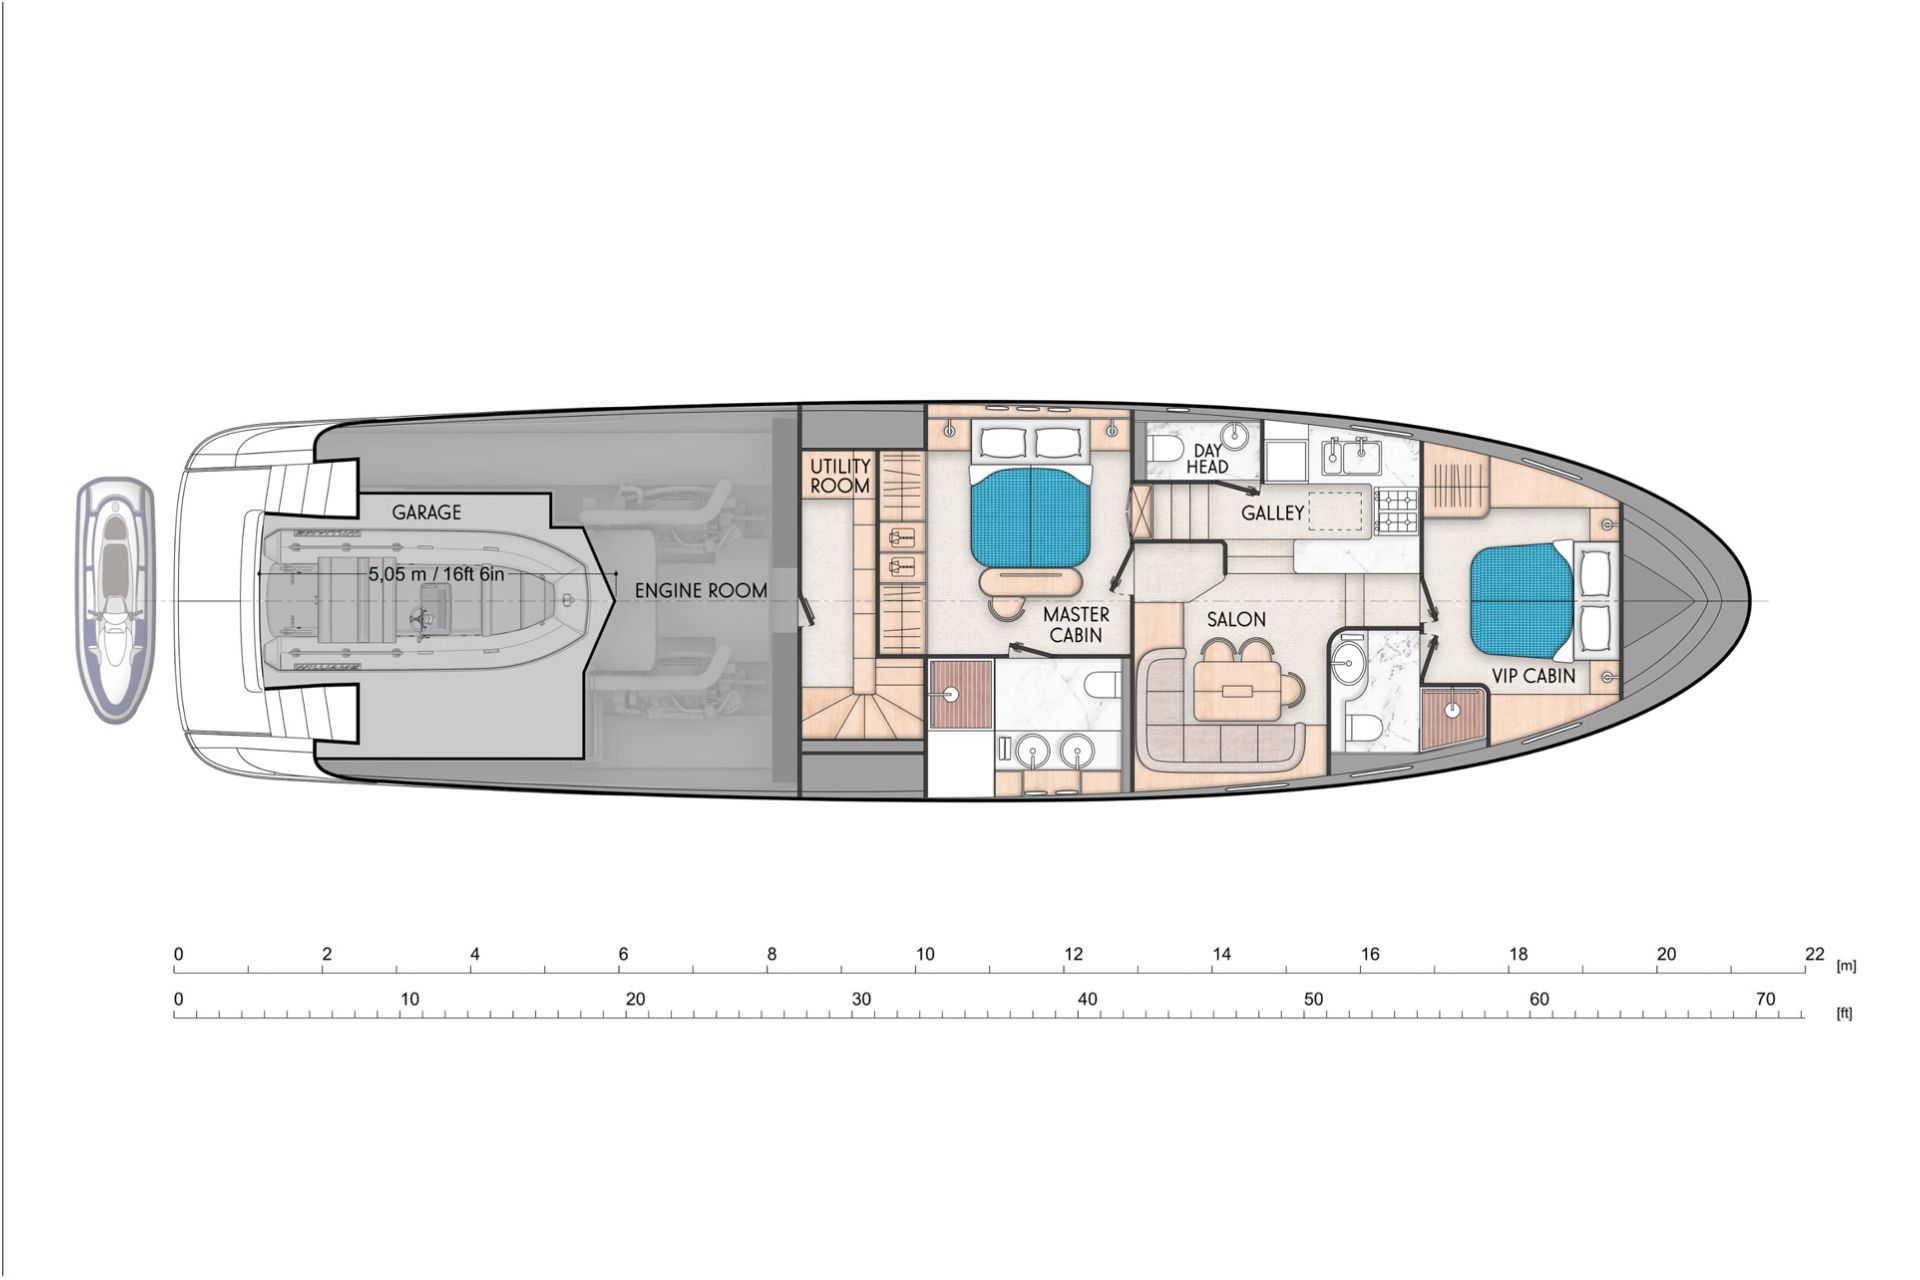 Lower deck type A No.5 with bigger galley with full size fridge with freezer. Salon with dining table. Sofas are good places for children to play. Sofas could be unfolding for sleeping with a sliding wall to separate this space.